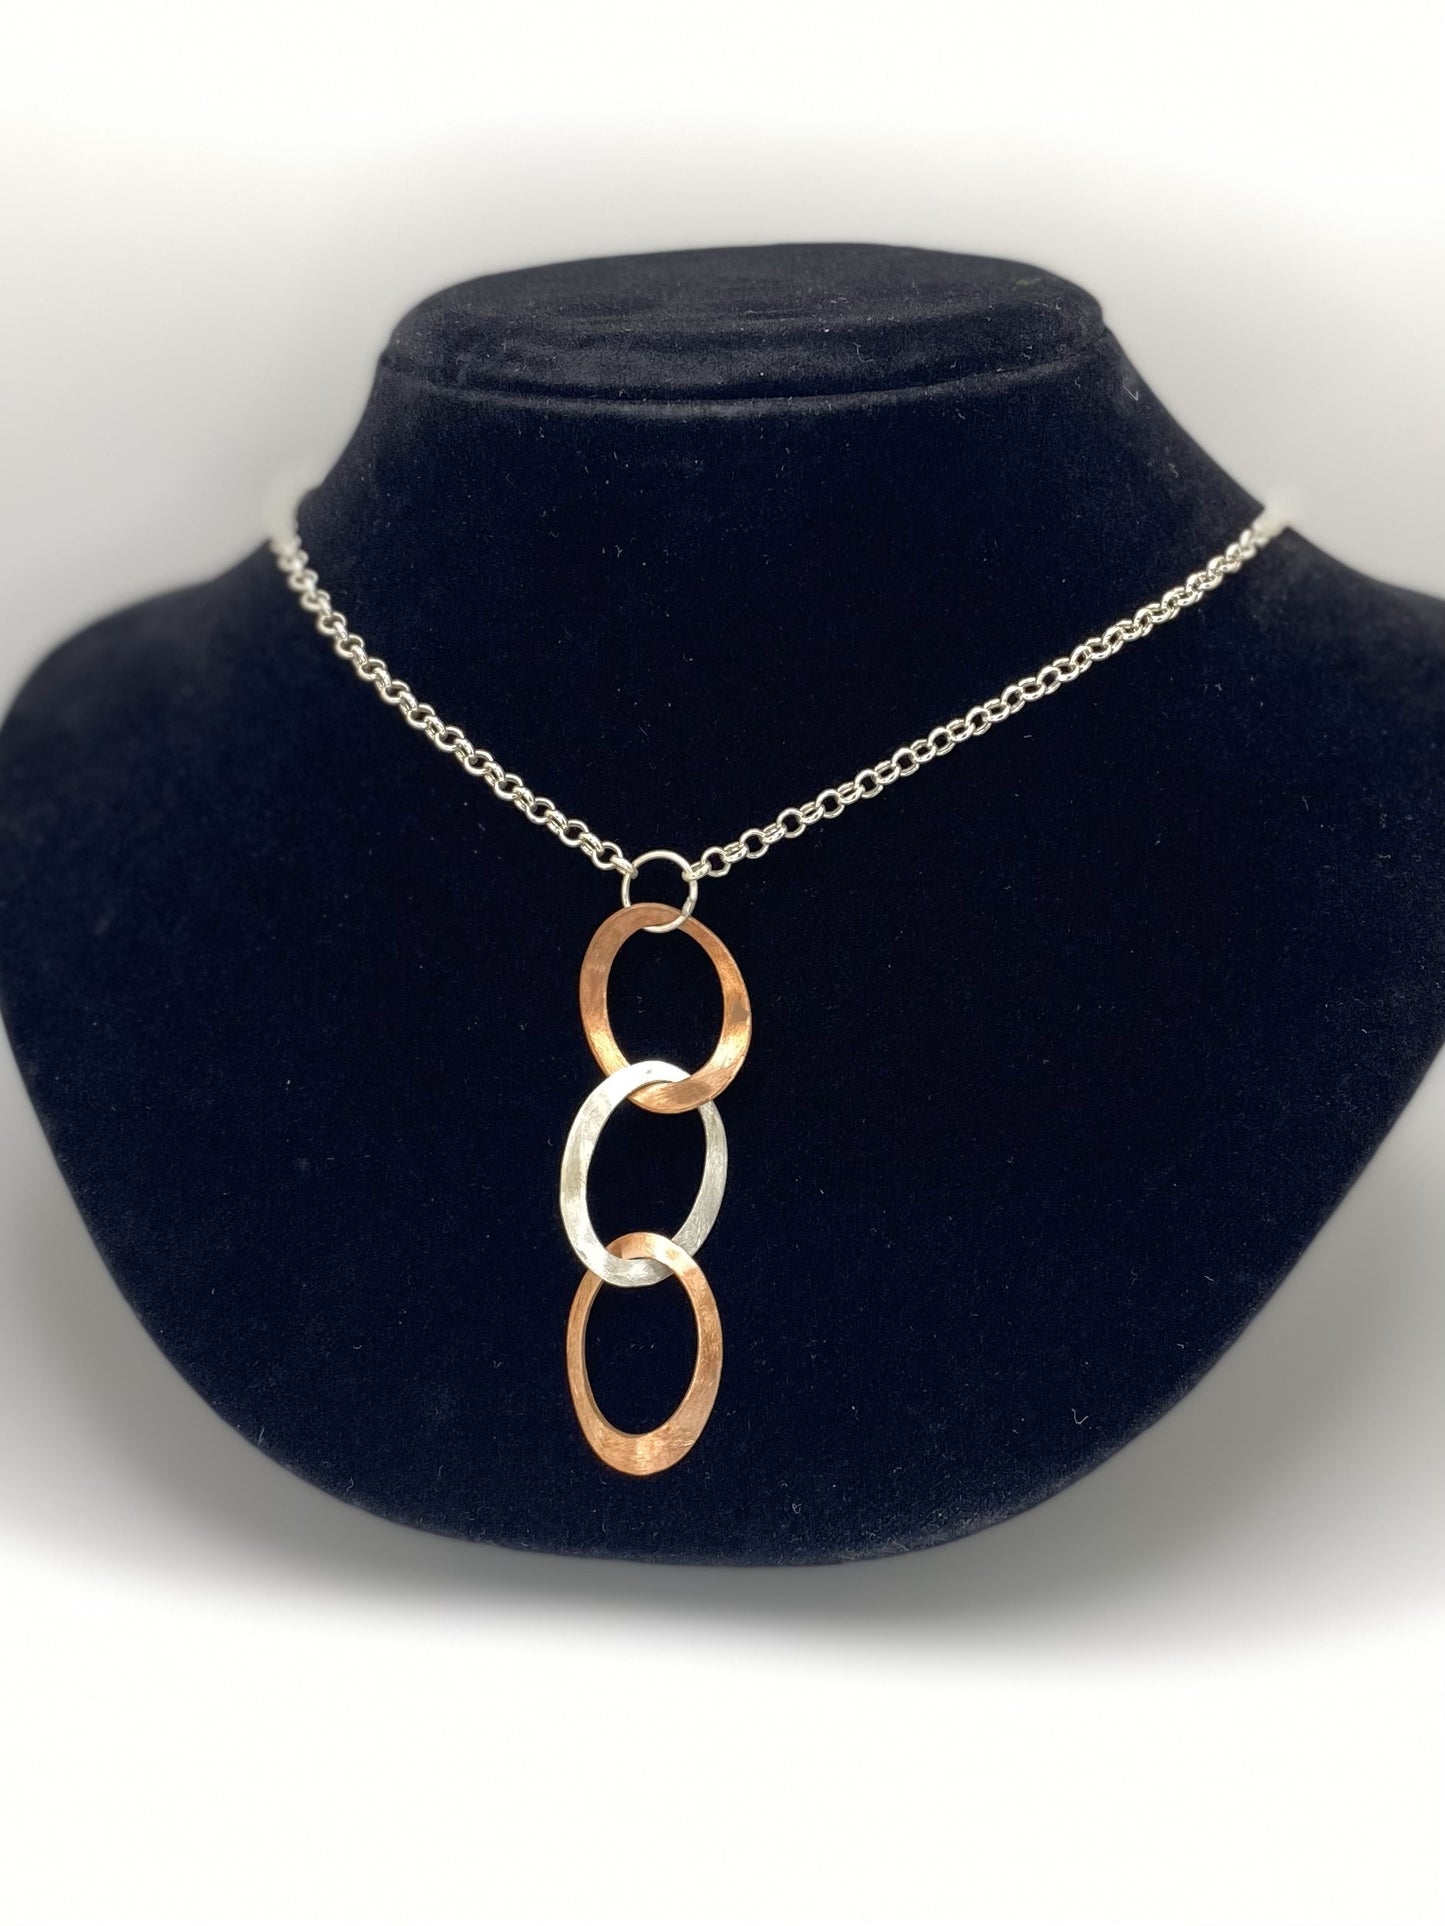 Three Ovals handmade Necklace in Sterling silver and Copper with Sterling Silver Chain